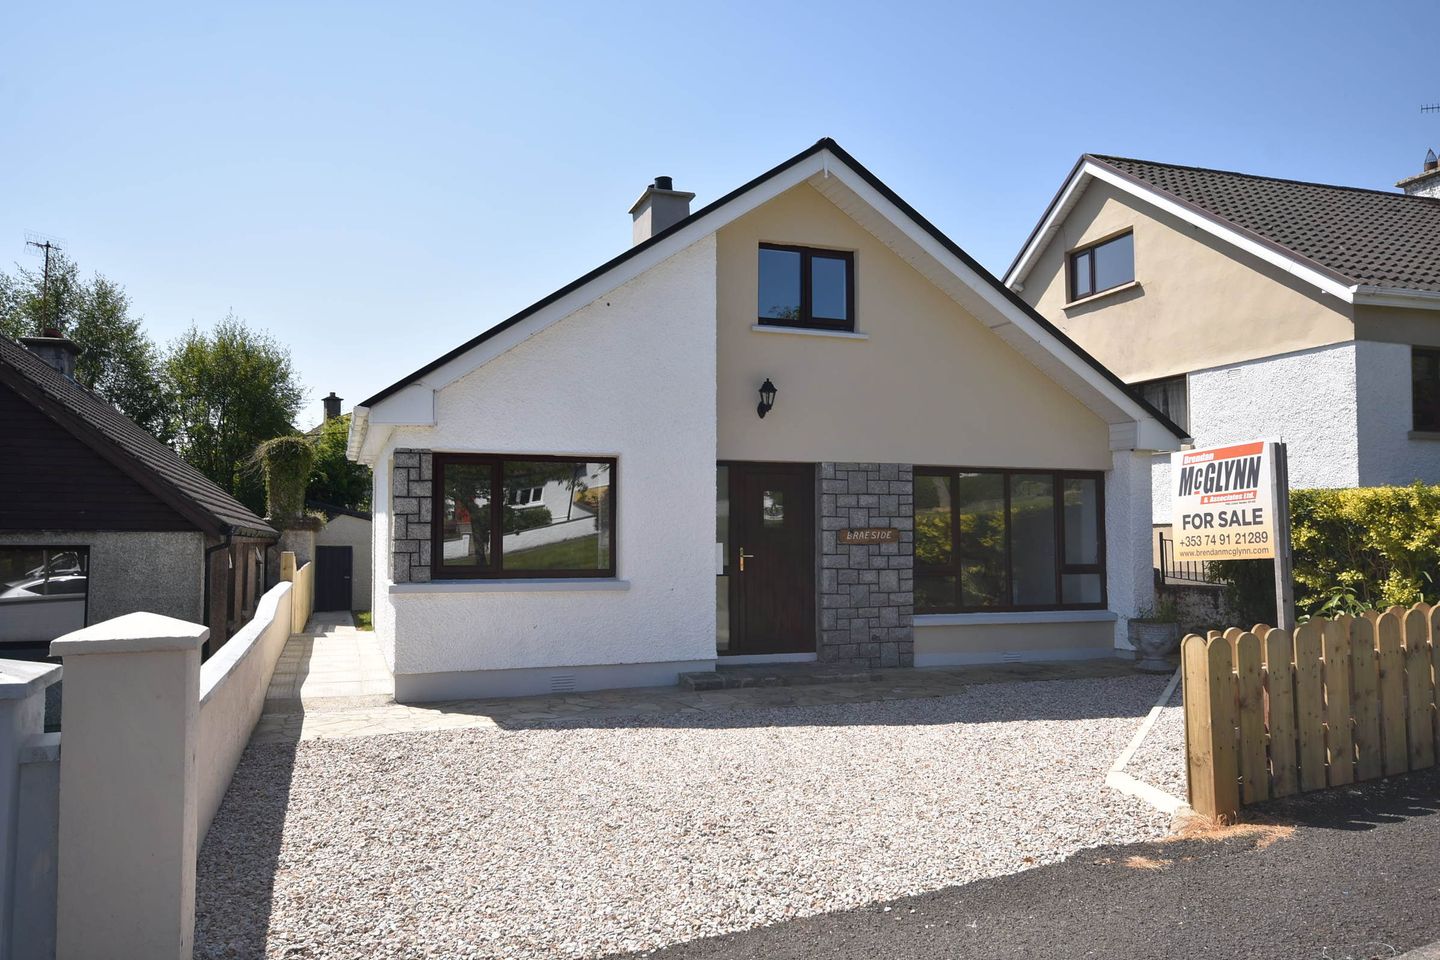 Brae Side, Iona Road, Letterkenny, Co. Donegal